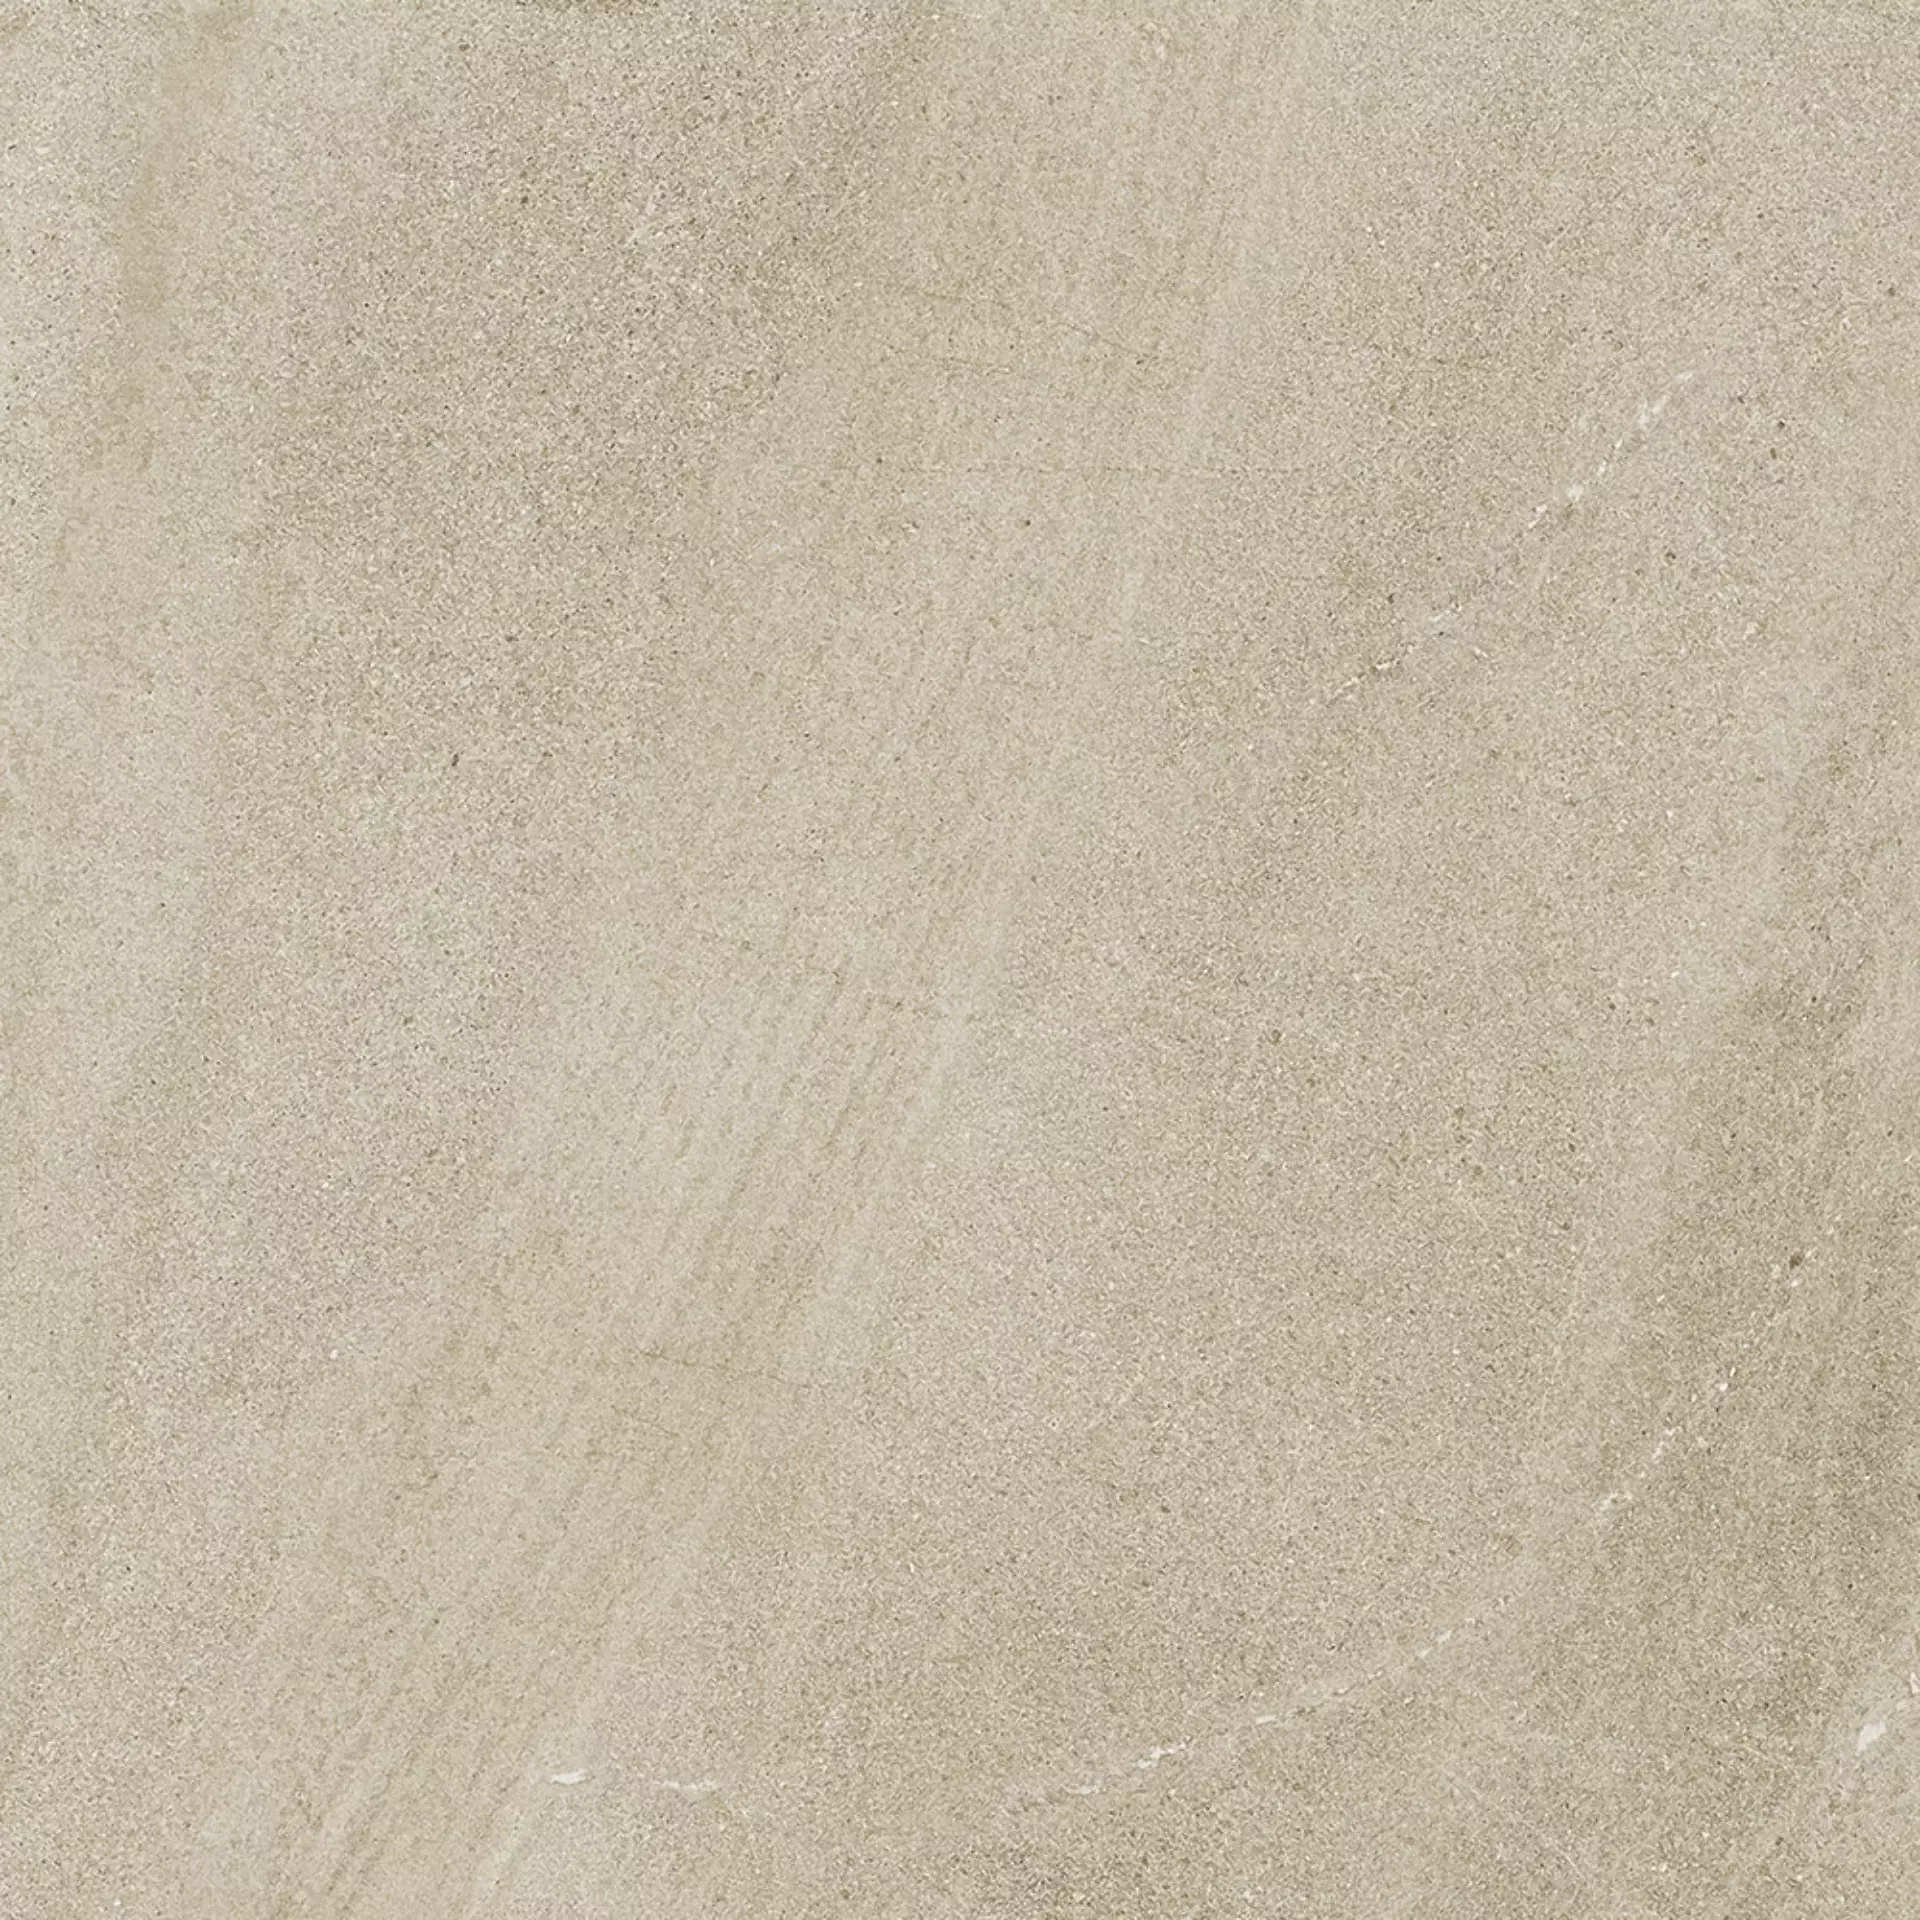 Cottodeste Limestone Amber Honed Protect EGGLSH0 90x90cm rectified 14mm